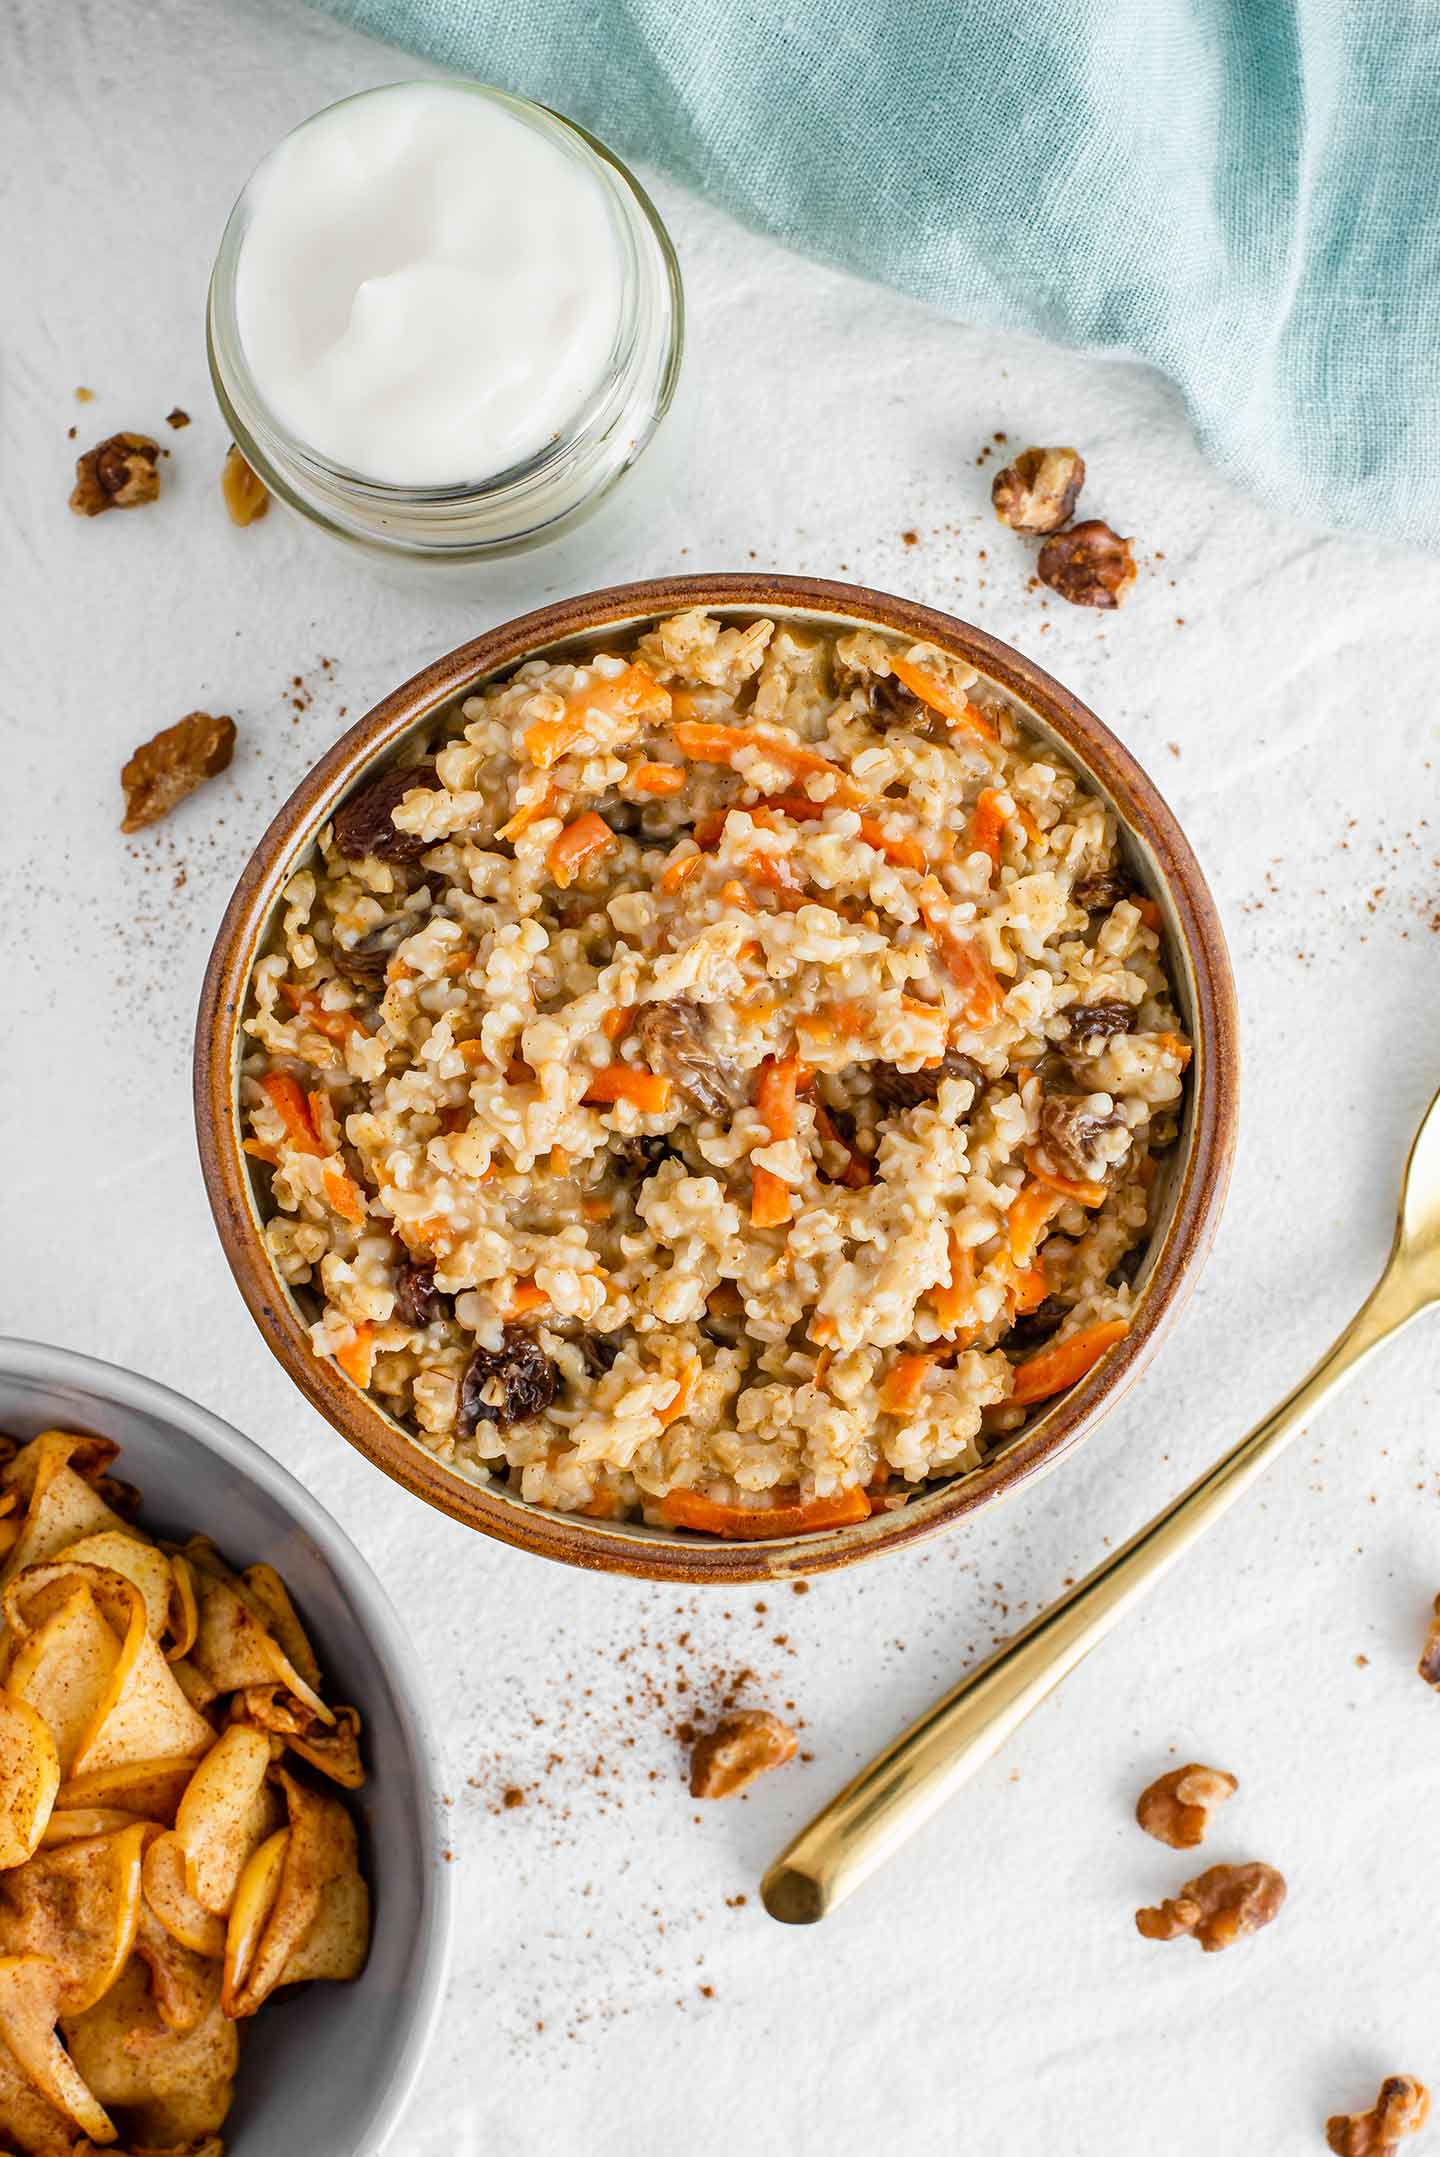 Top down view of a bowl of steel cut oats with shredded carrot and raisins.